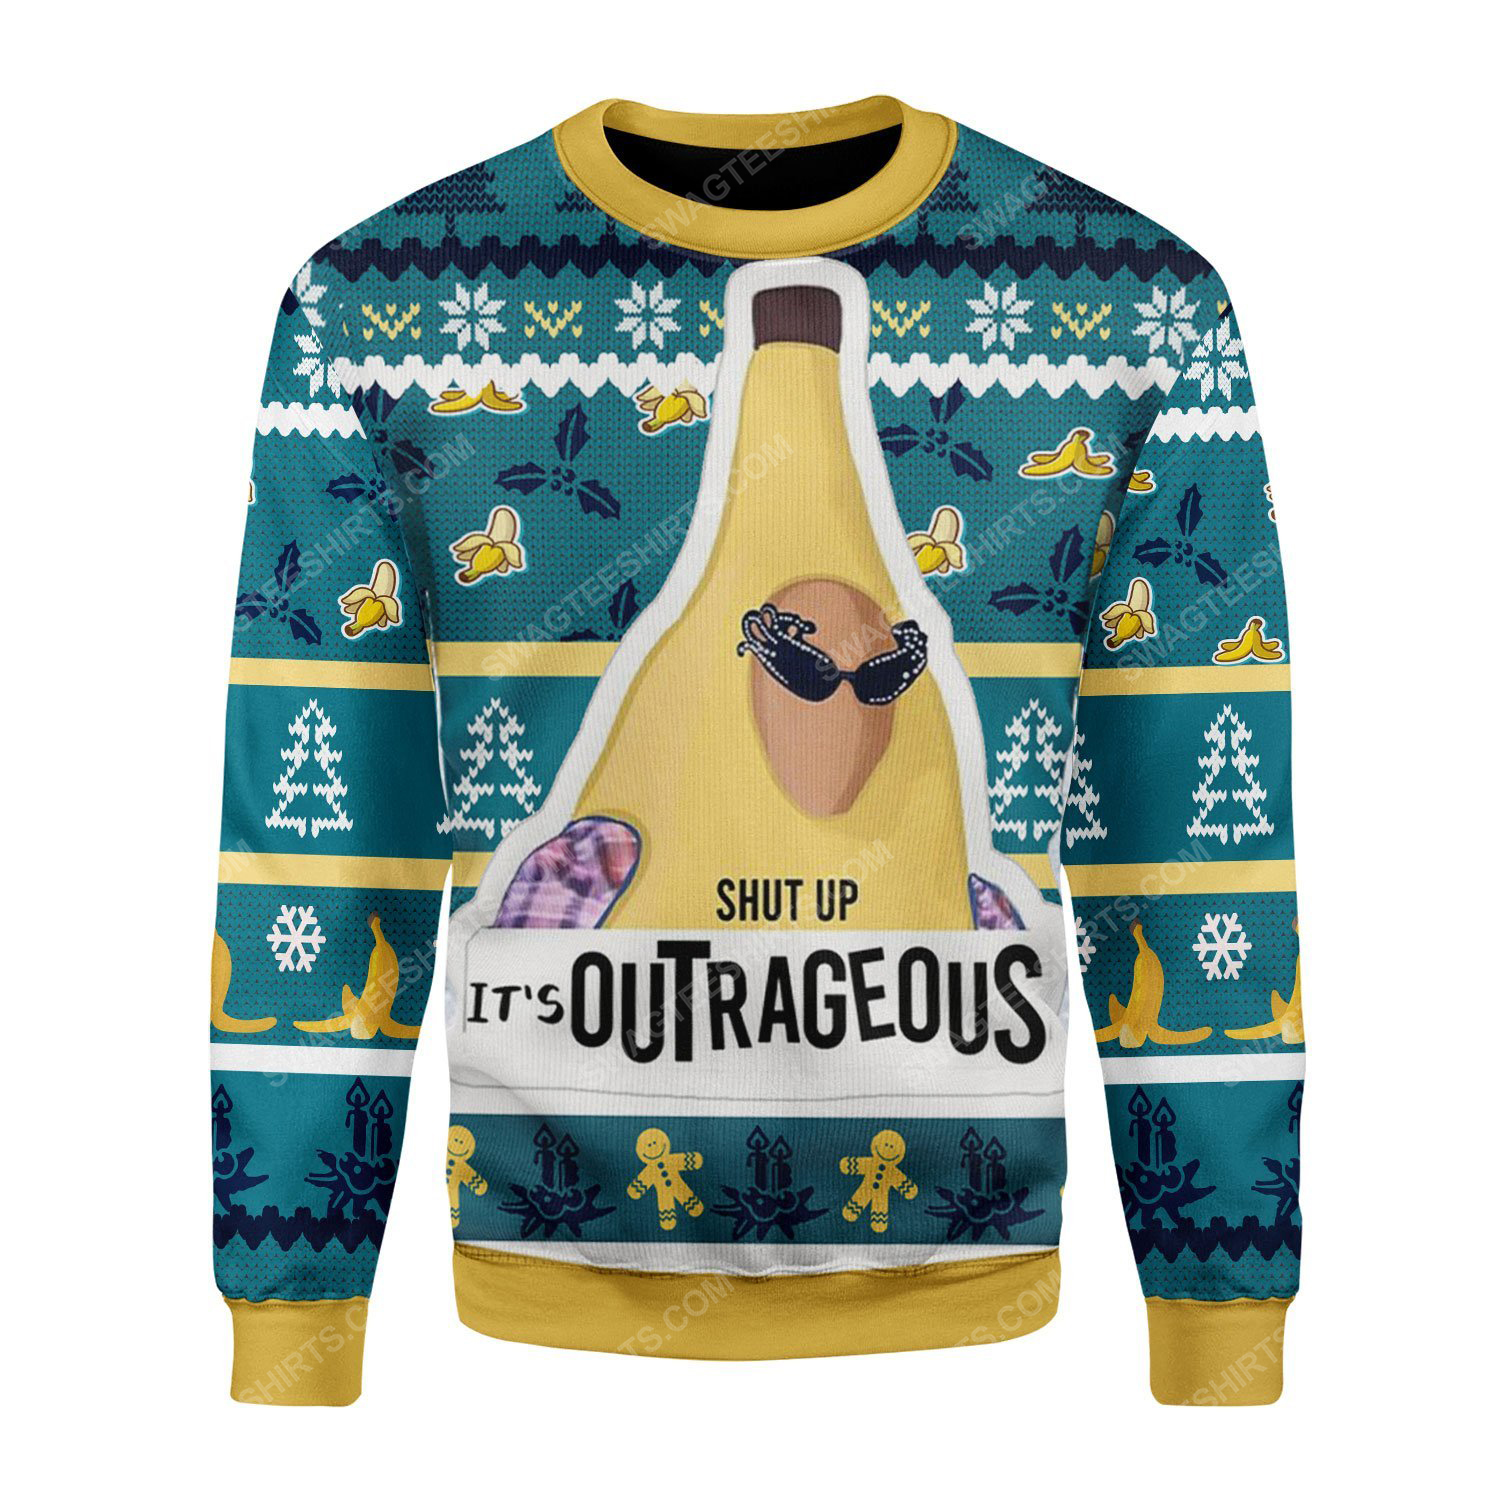 [special edition] Banana liam payne shut up it’s outrageous ugly christmas sweater – maria